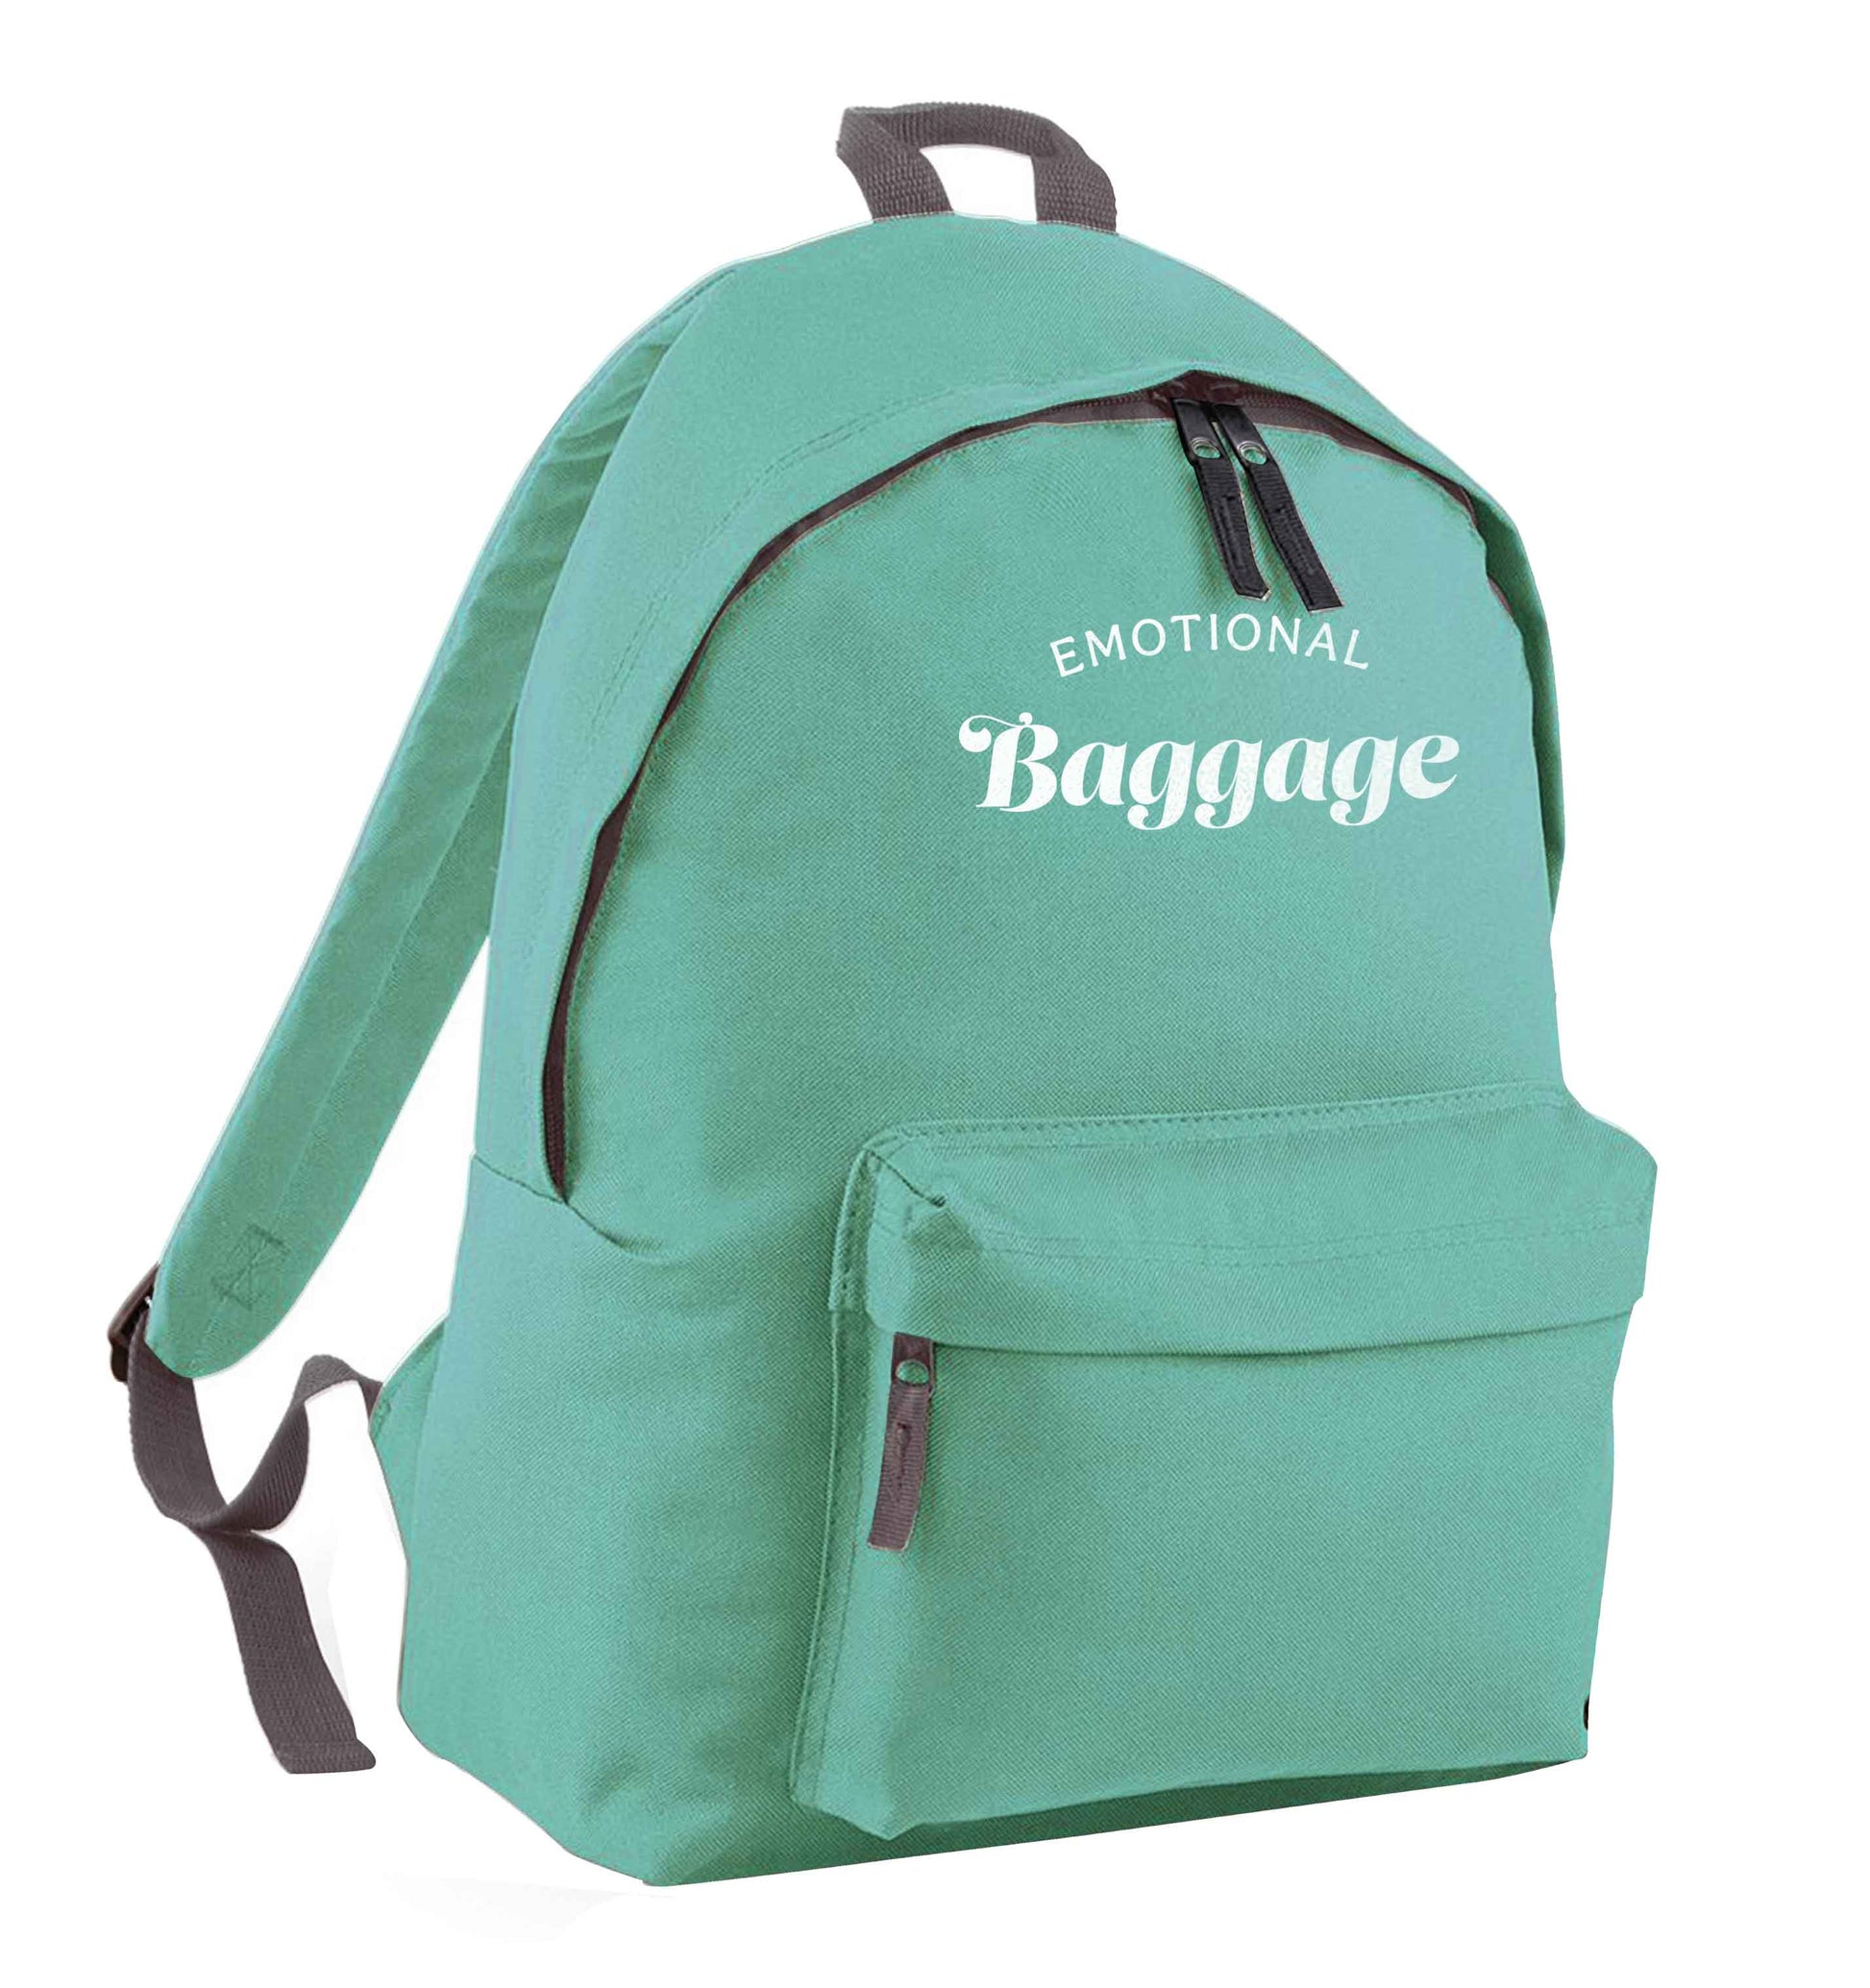 Emotional baggage mint adults backpack